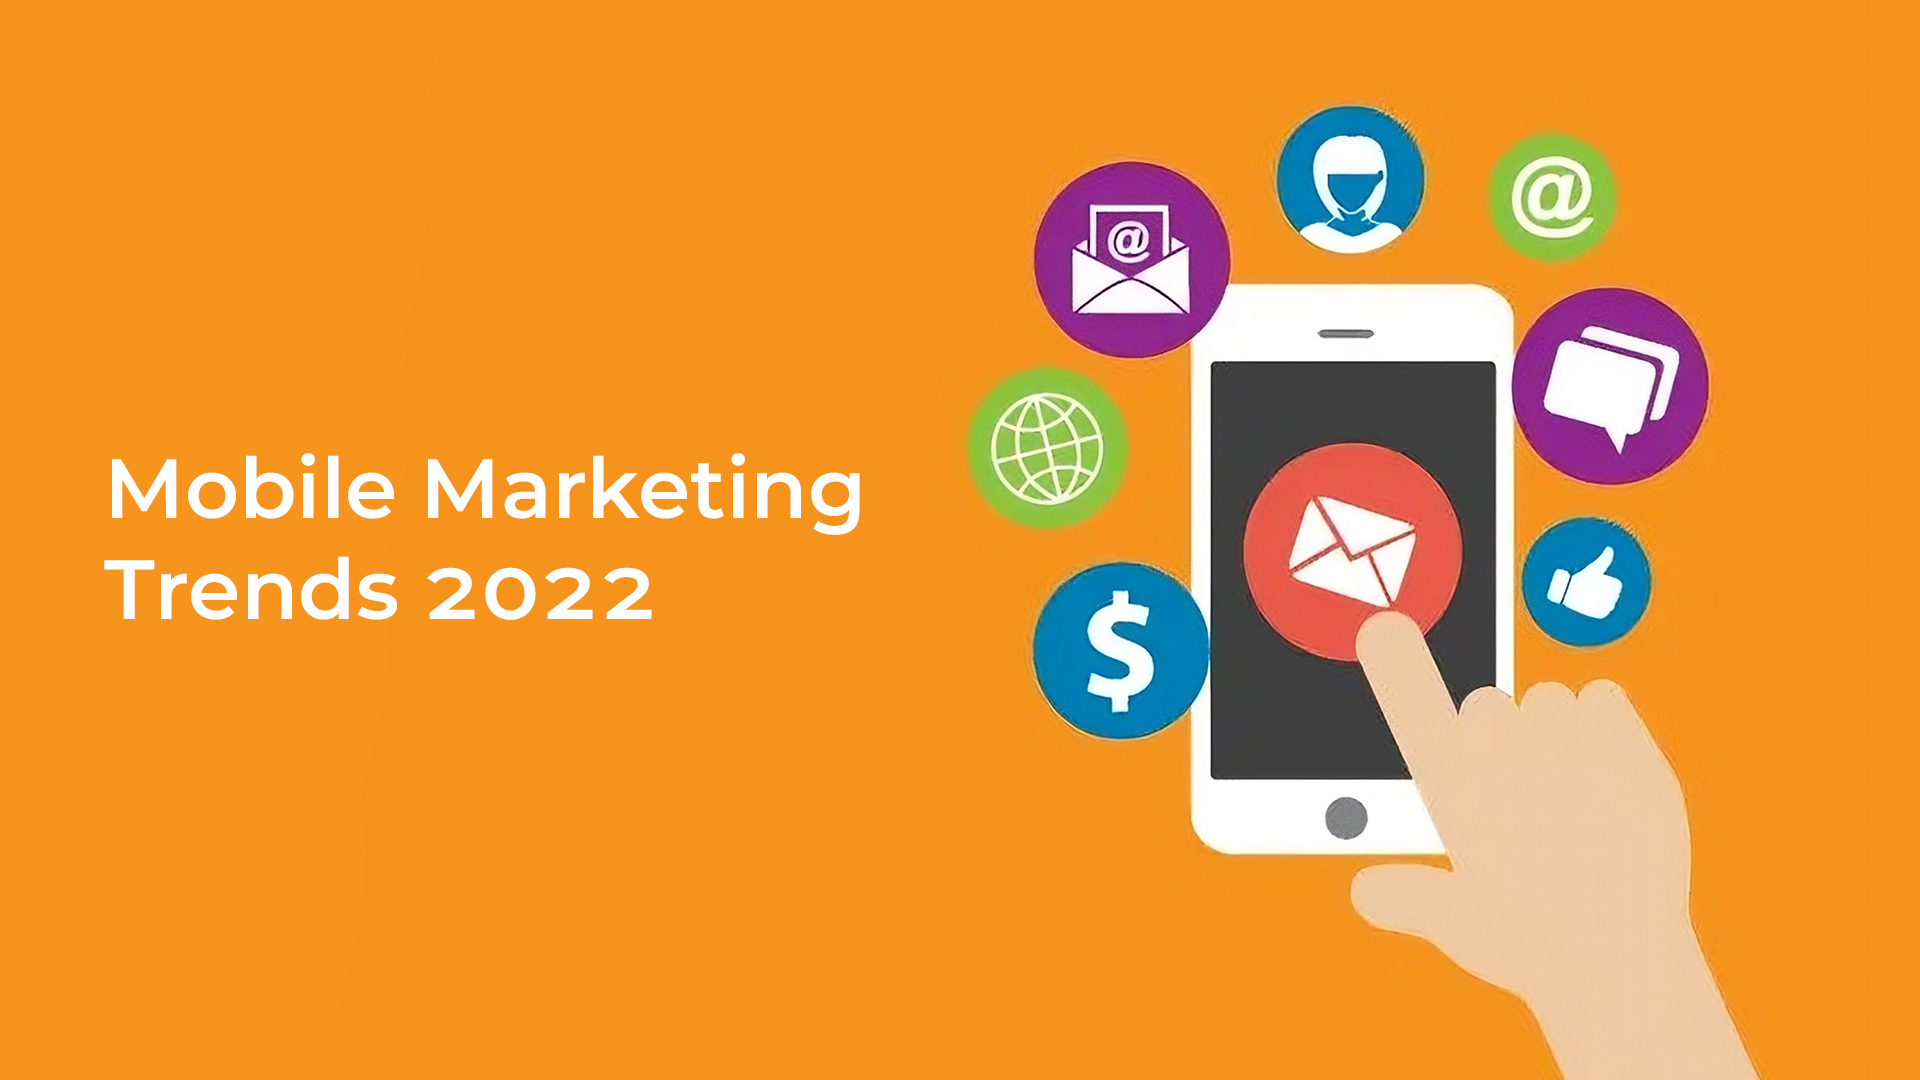 Mobile Marketing Trends 2022: Moving beyond privacy barriers